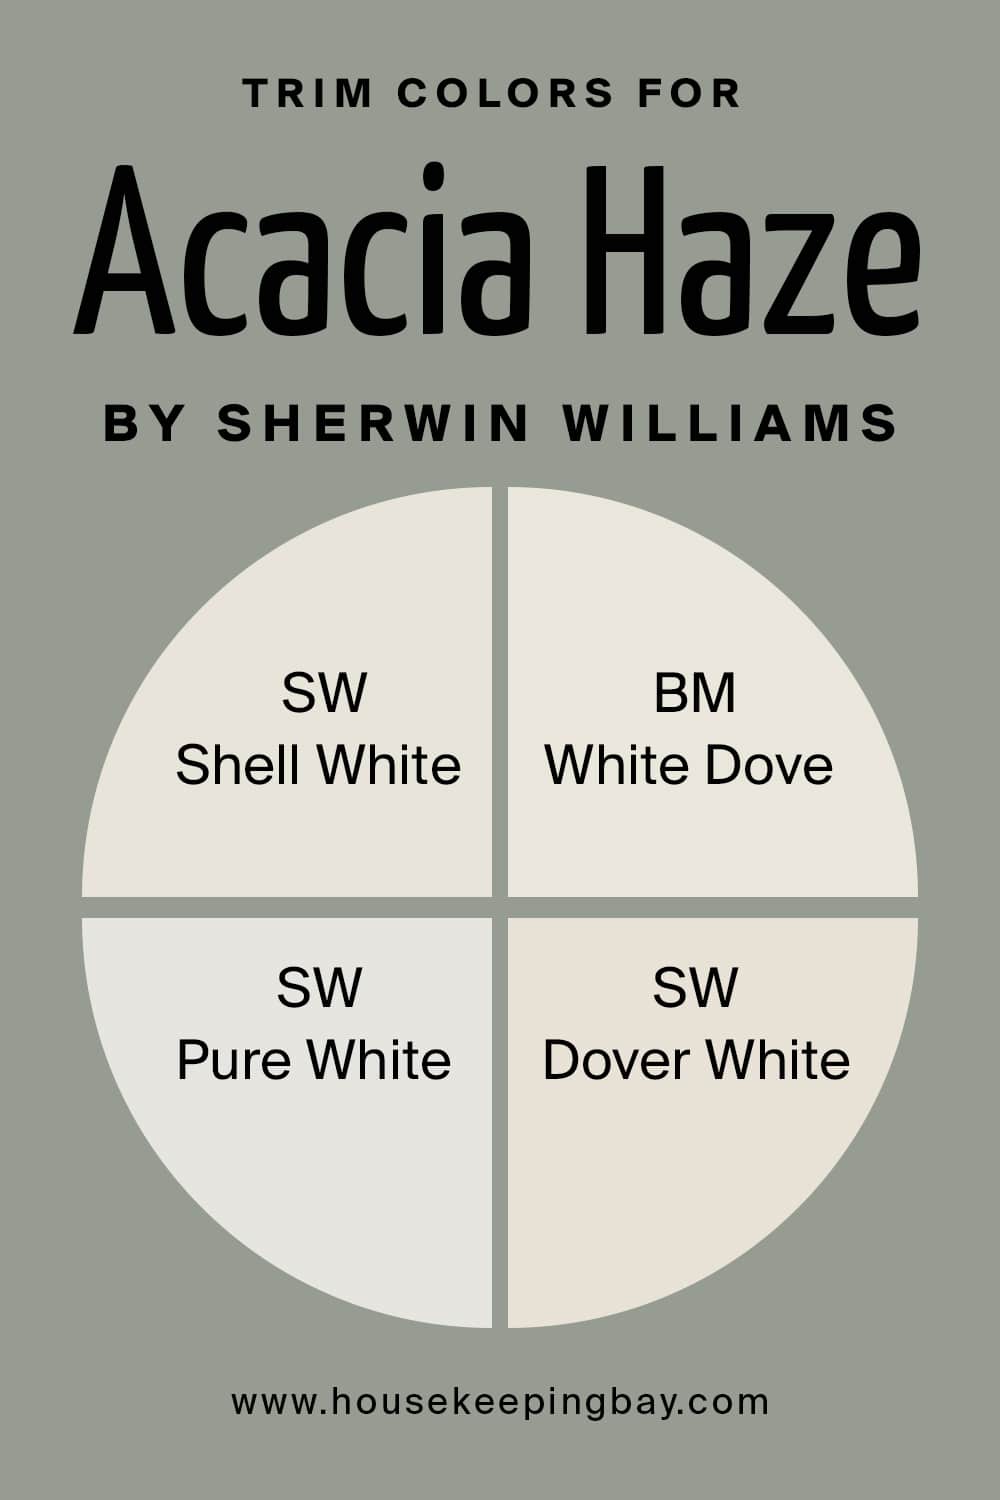 Trim Colors for Acacia Haze by Sherwin Williams